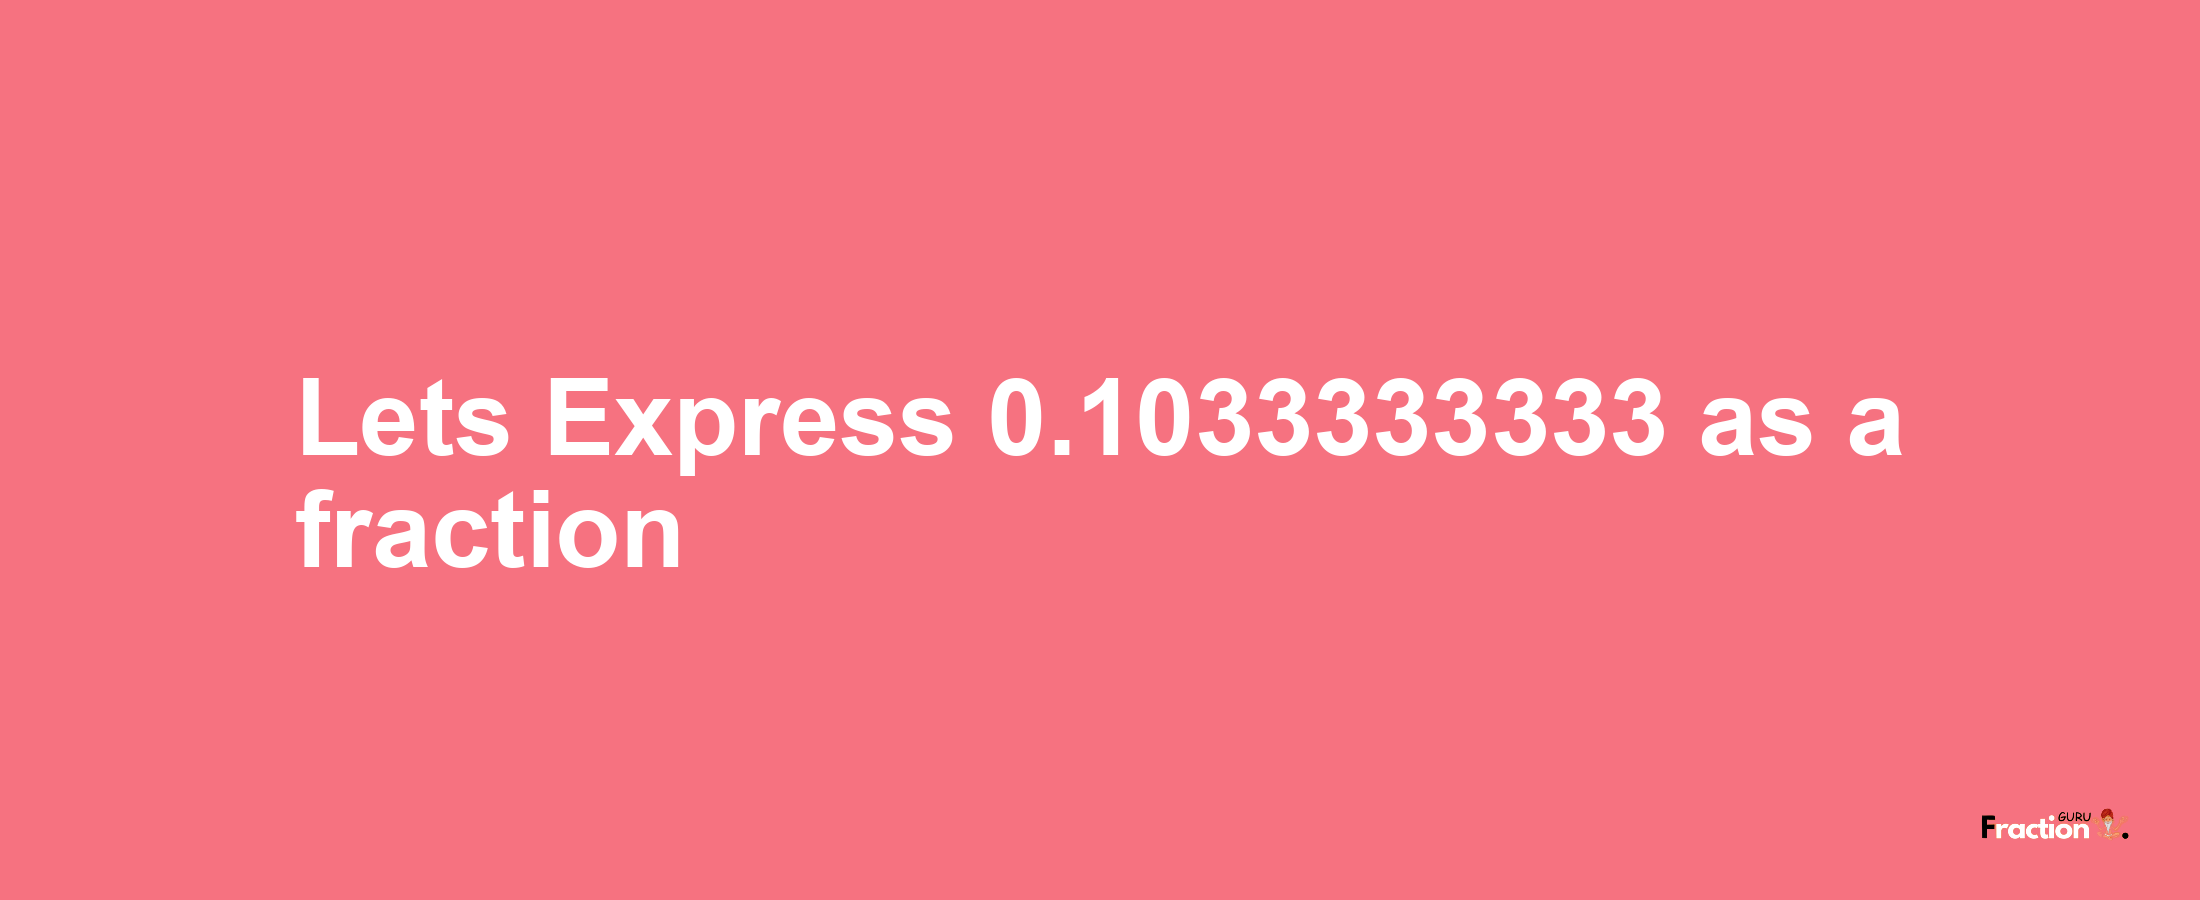 Lets Express 0.1033333333 as afraction